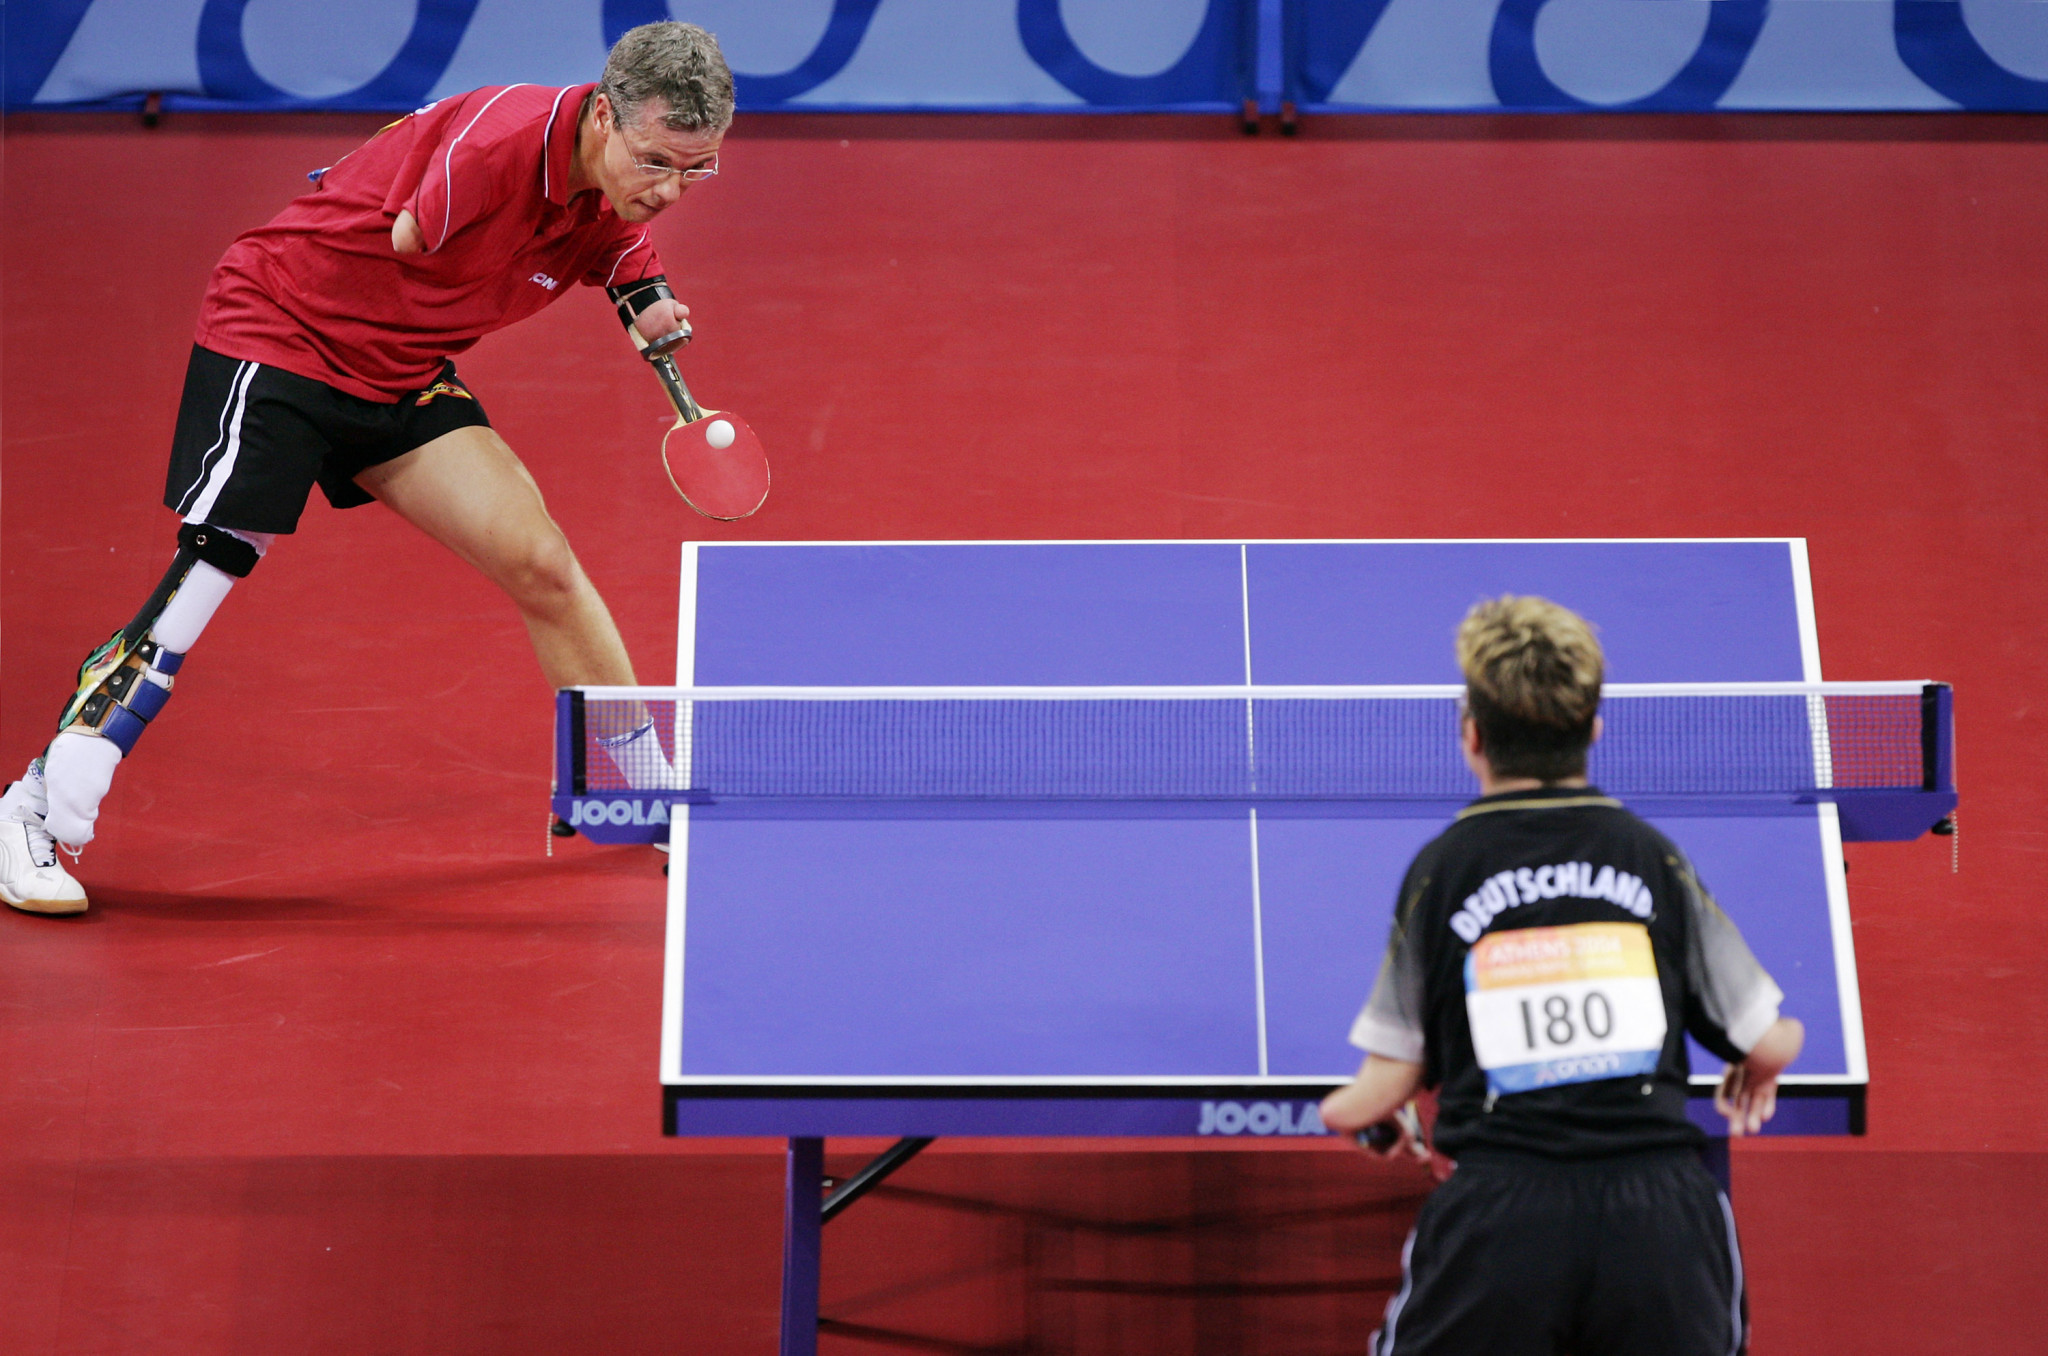 Paralympic table tennis champion Rainer Schmidt is one of the existing Board members ©Getty Images